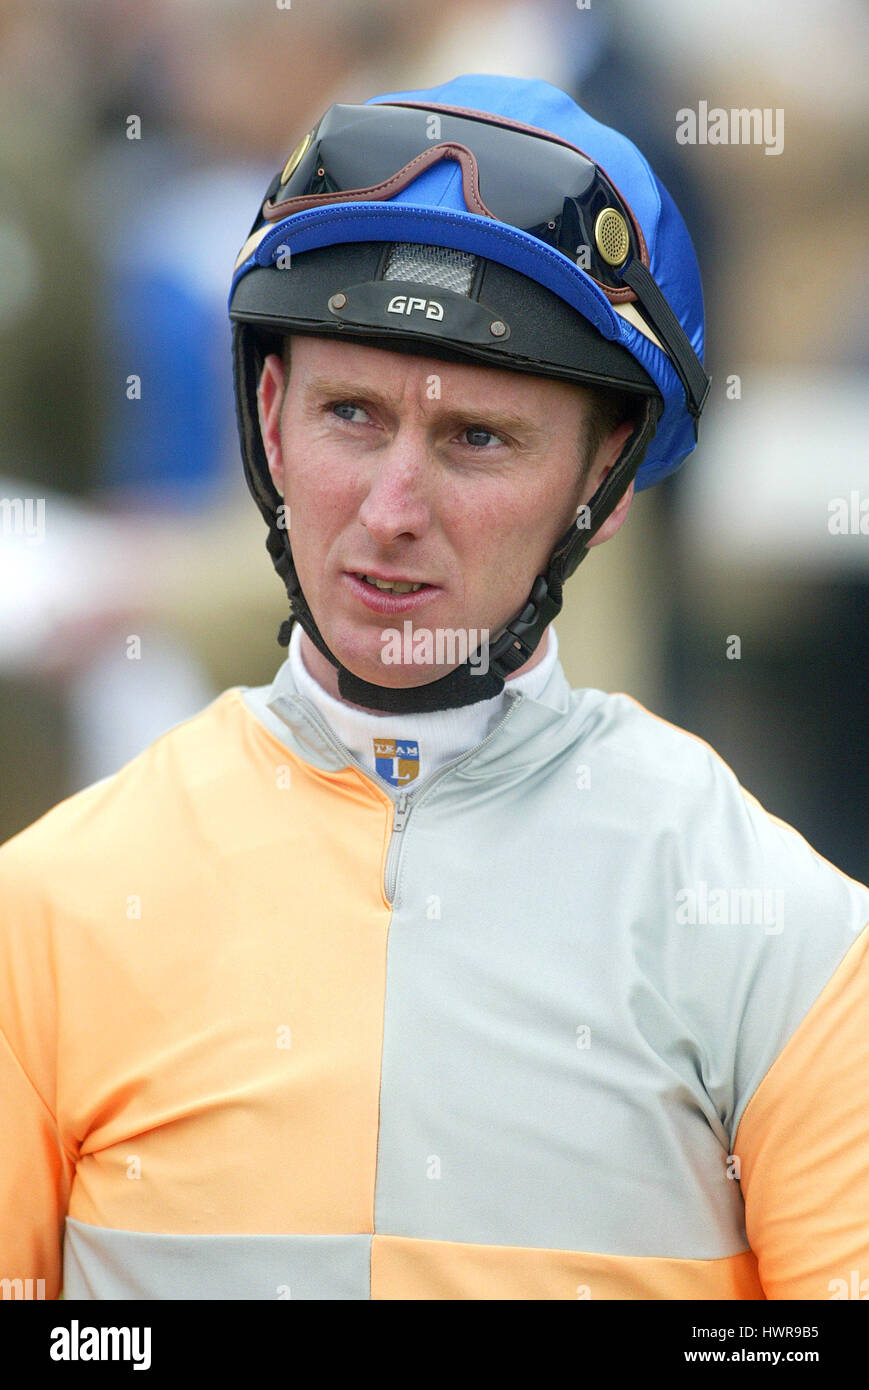 MARTIN DWYER JOCKEY DONCASTER RACECOURSE DONCASTER 31 March 2005 Stock ...